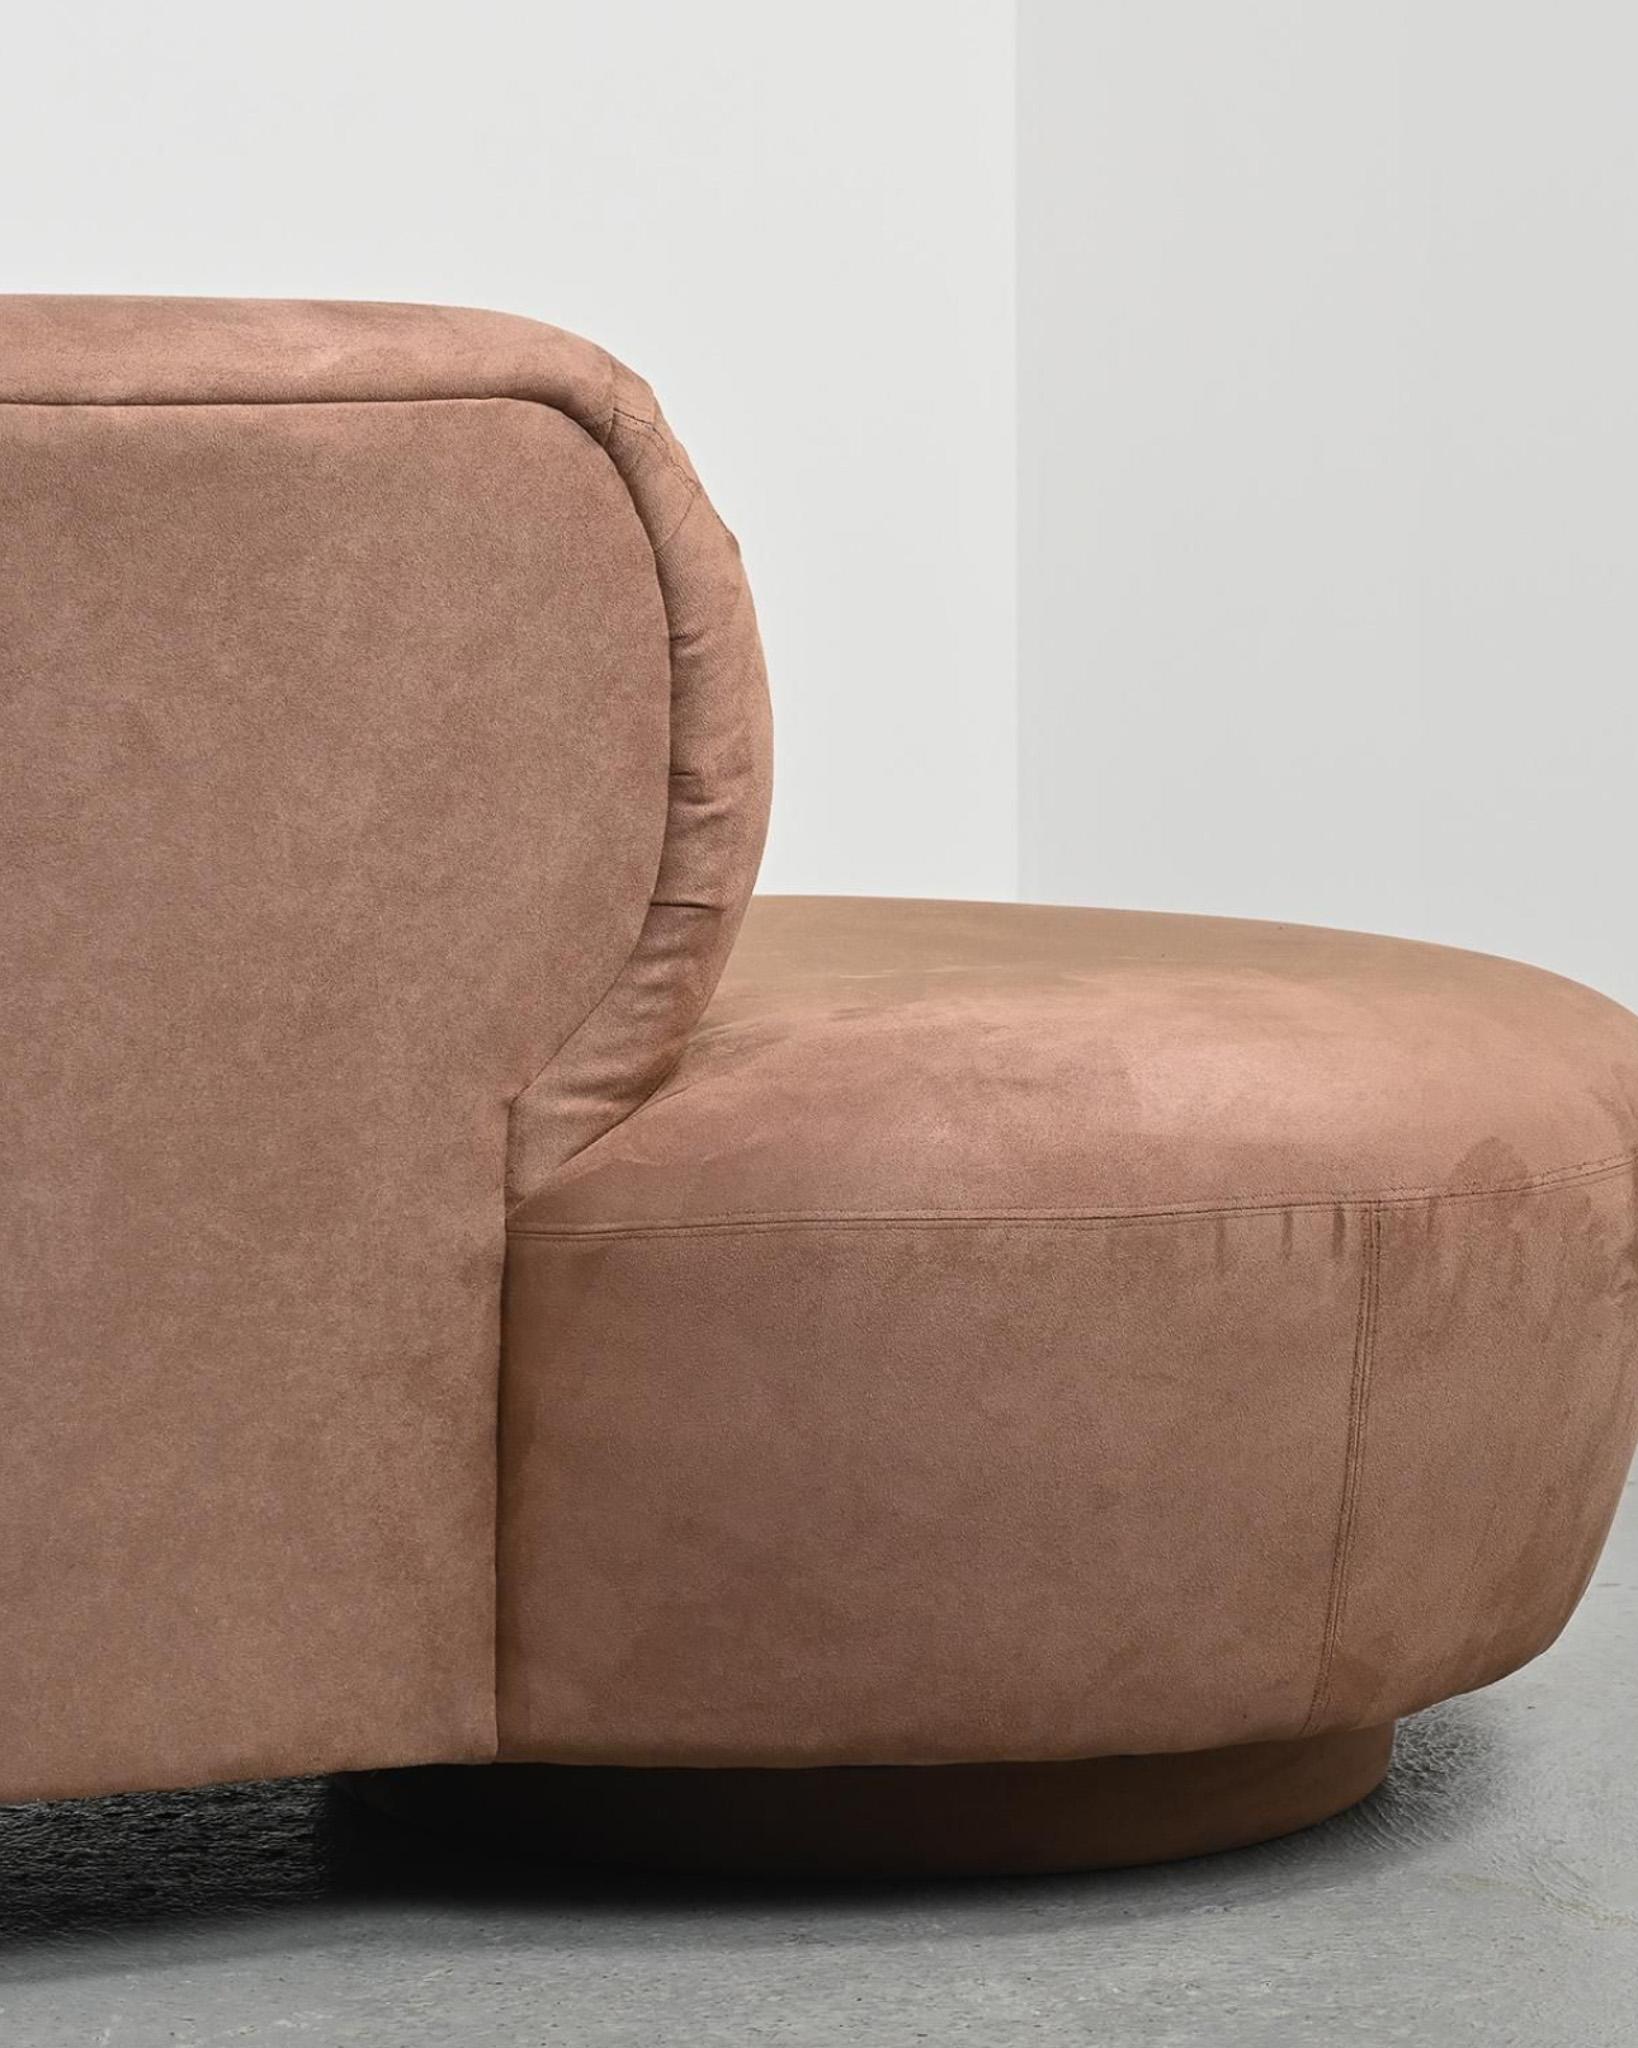 Vladimir Kagan Curved Free Form Styled Sofa in Suede Upholstery, 1990s For Sale 2